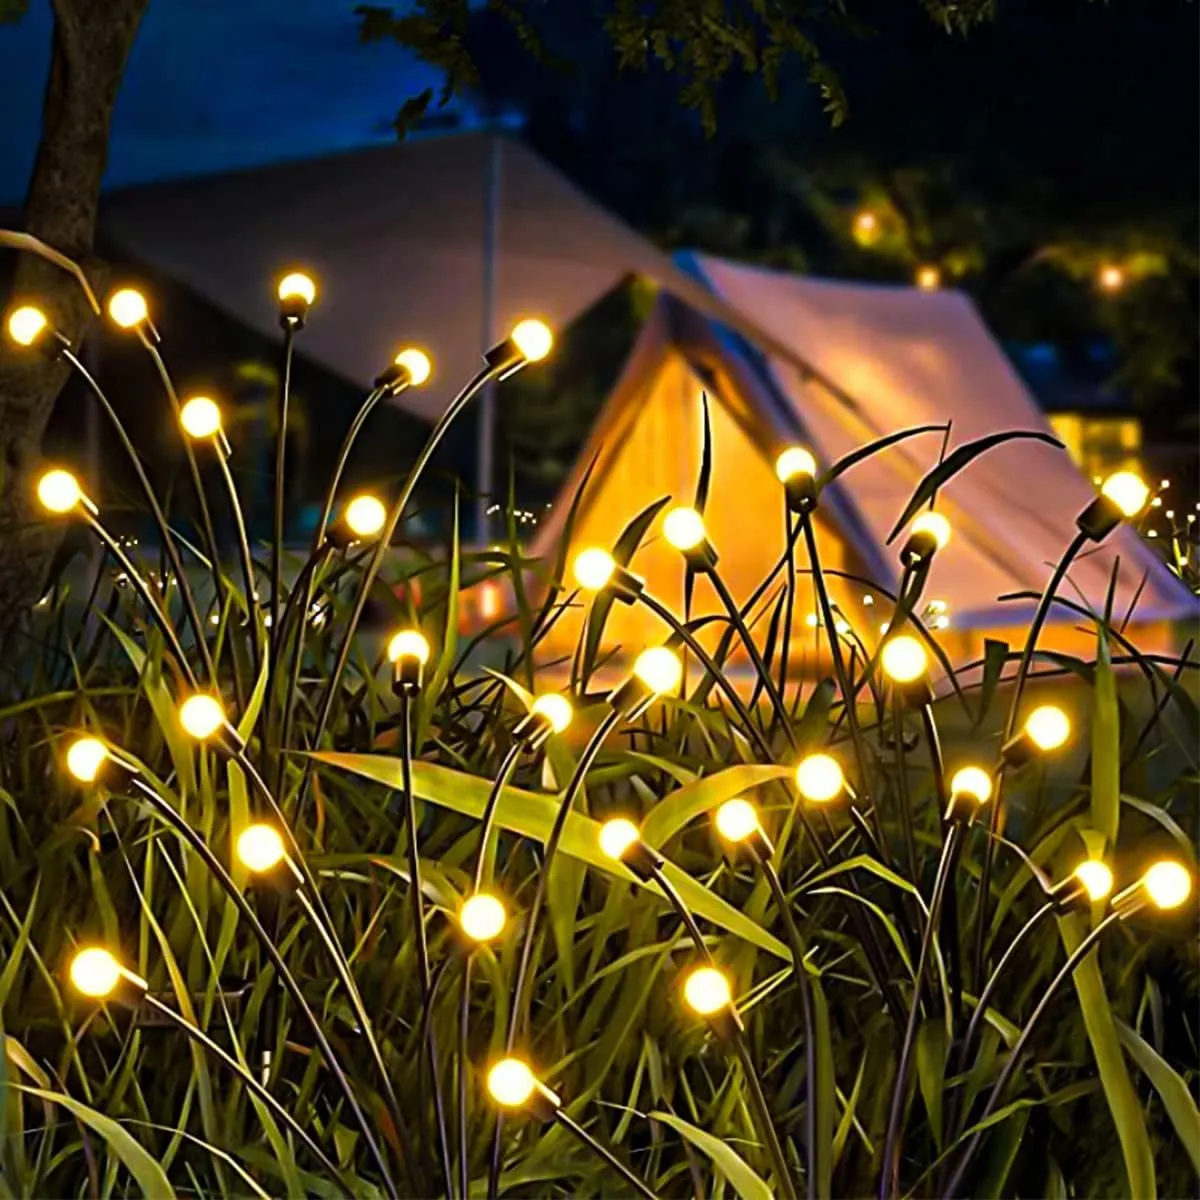 Lights in a field with a tent in the background. They sway and are designed to look like fireflies